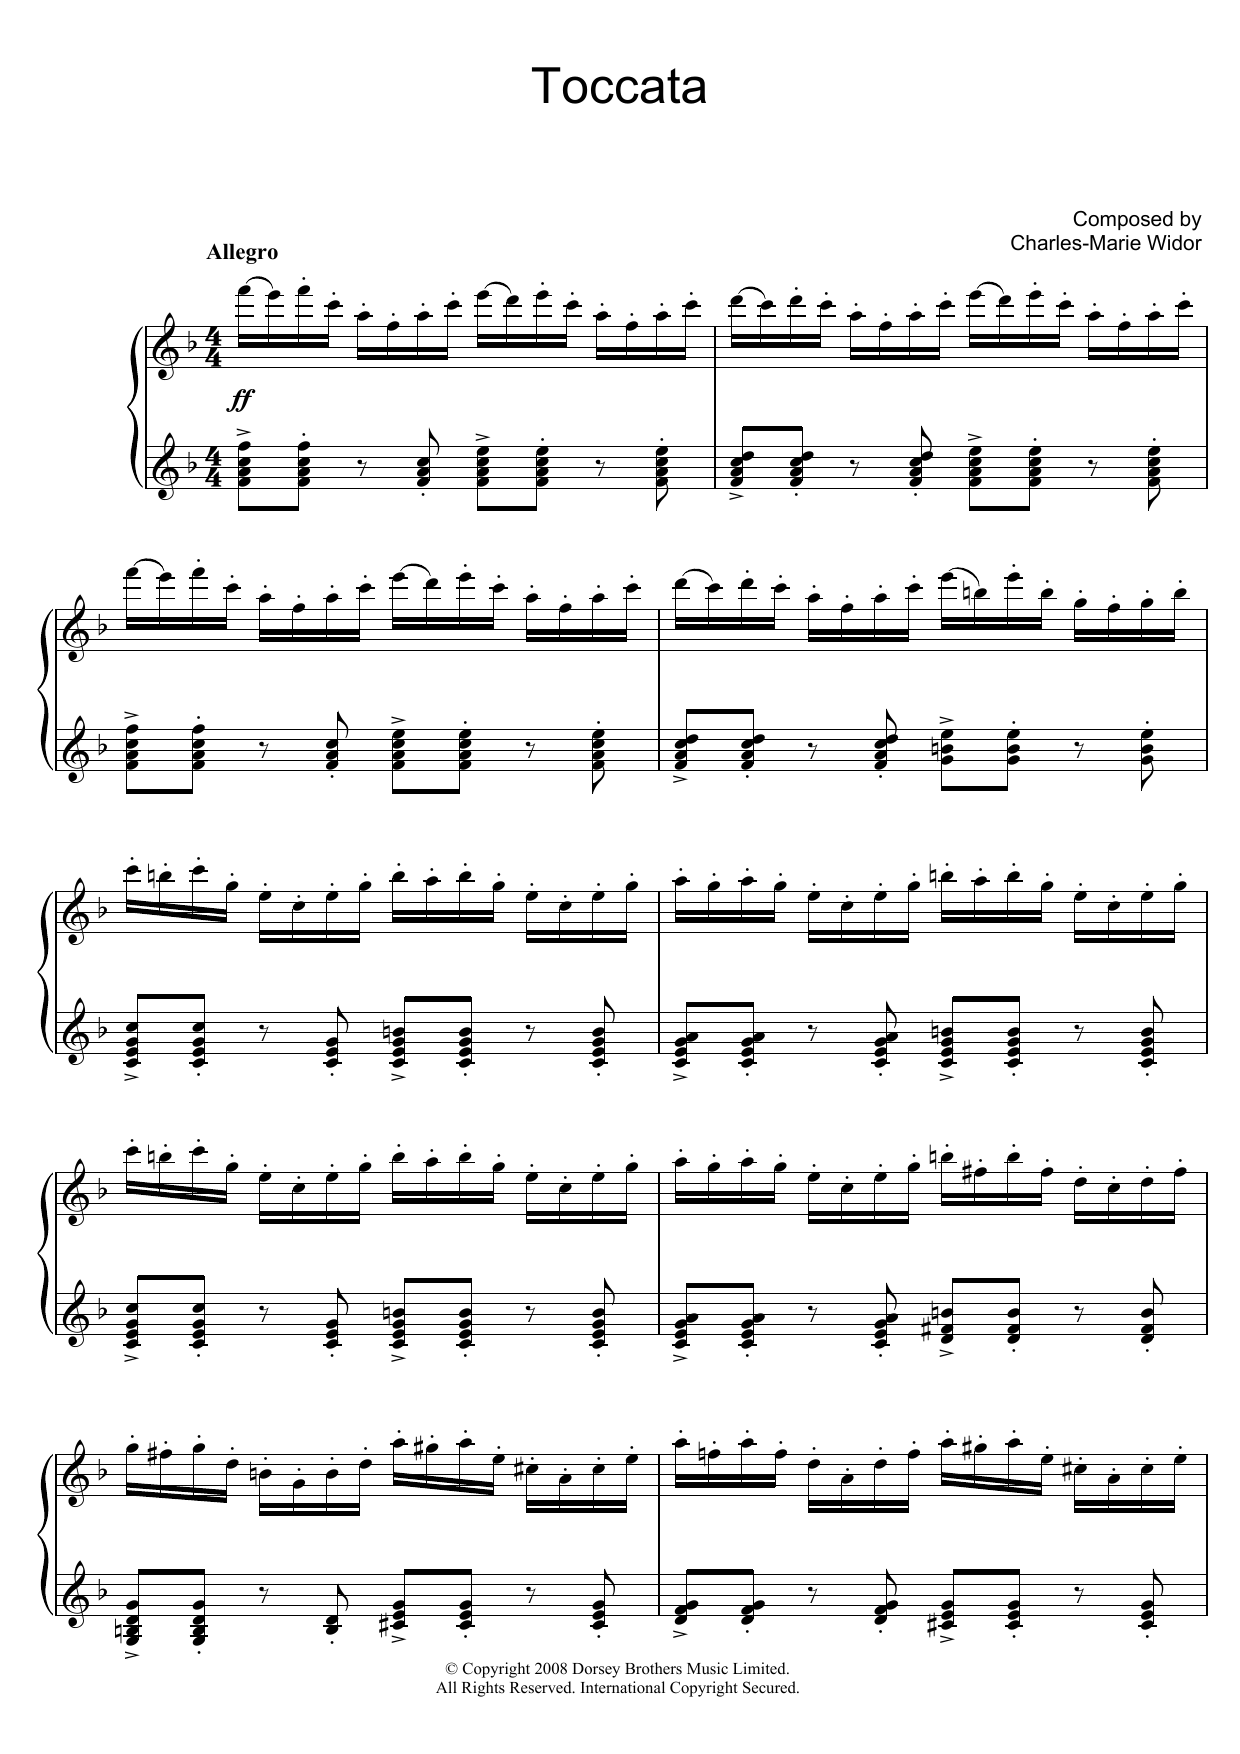 Download Charles-Marie Widor Toccata (from Symphony No. 5) Sheet Music